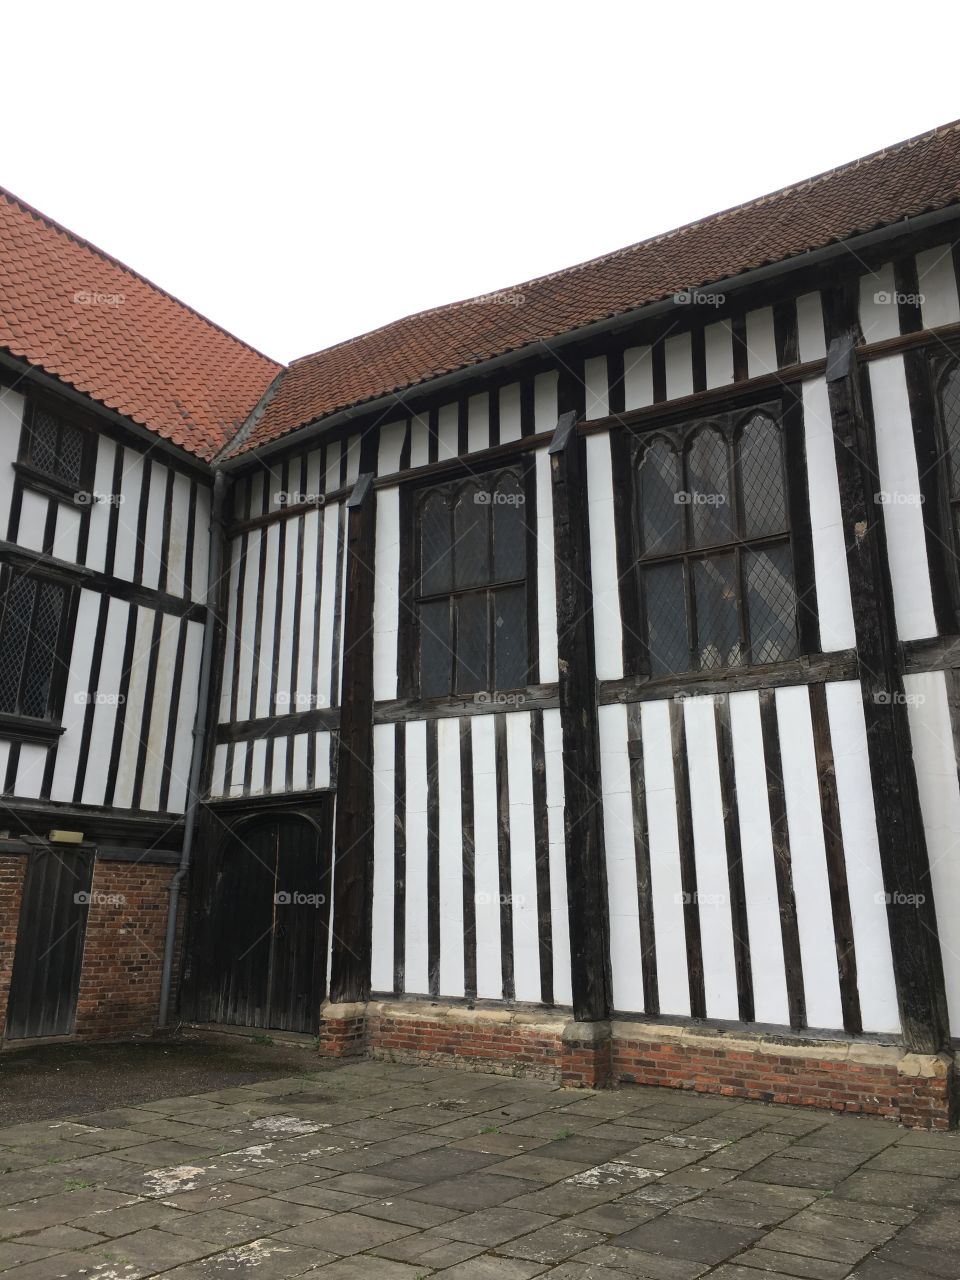 Exterior view of the great hall with timber framing of the medieval Manor House at Gainsborough Old Hall